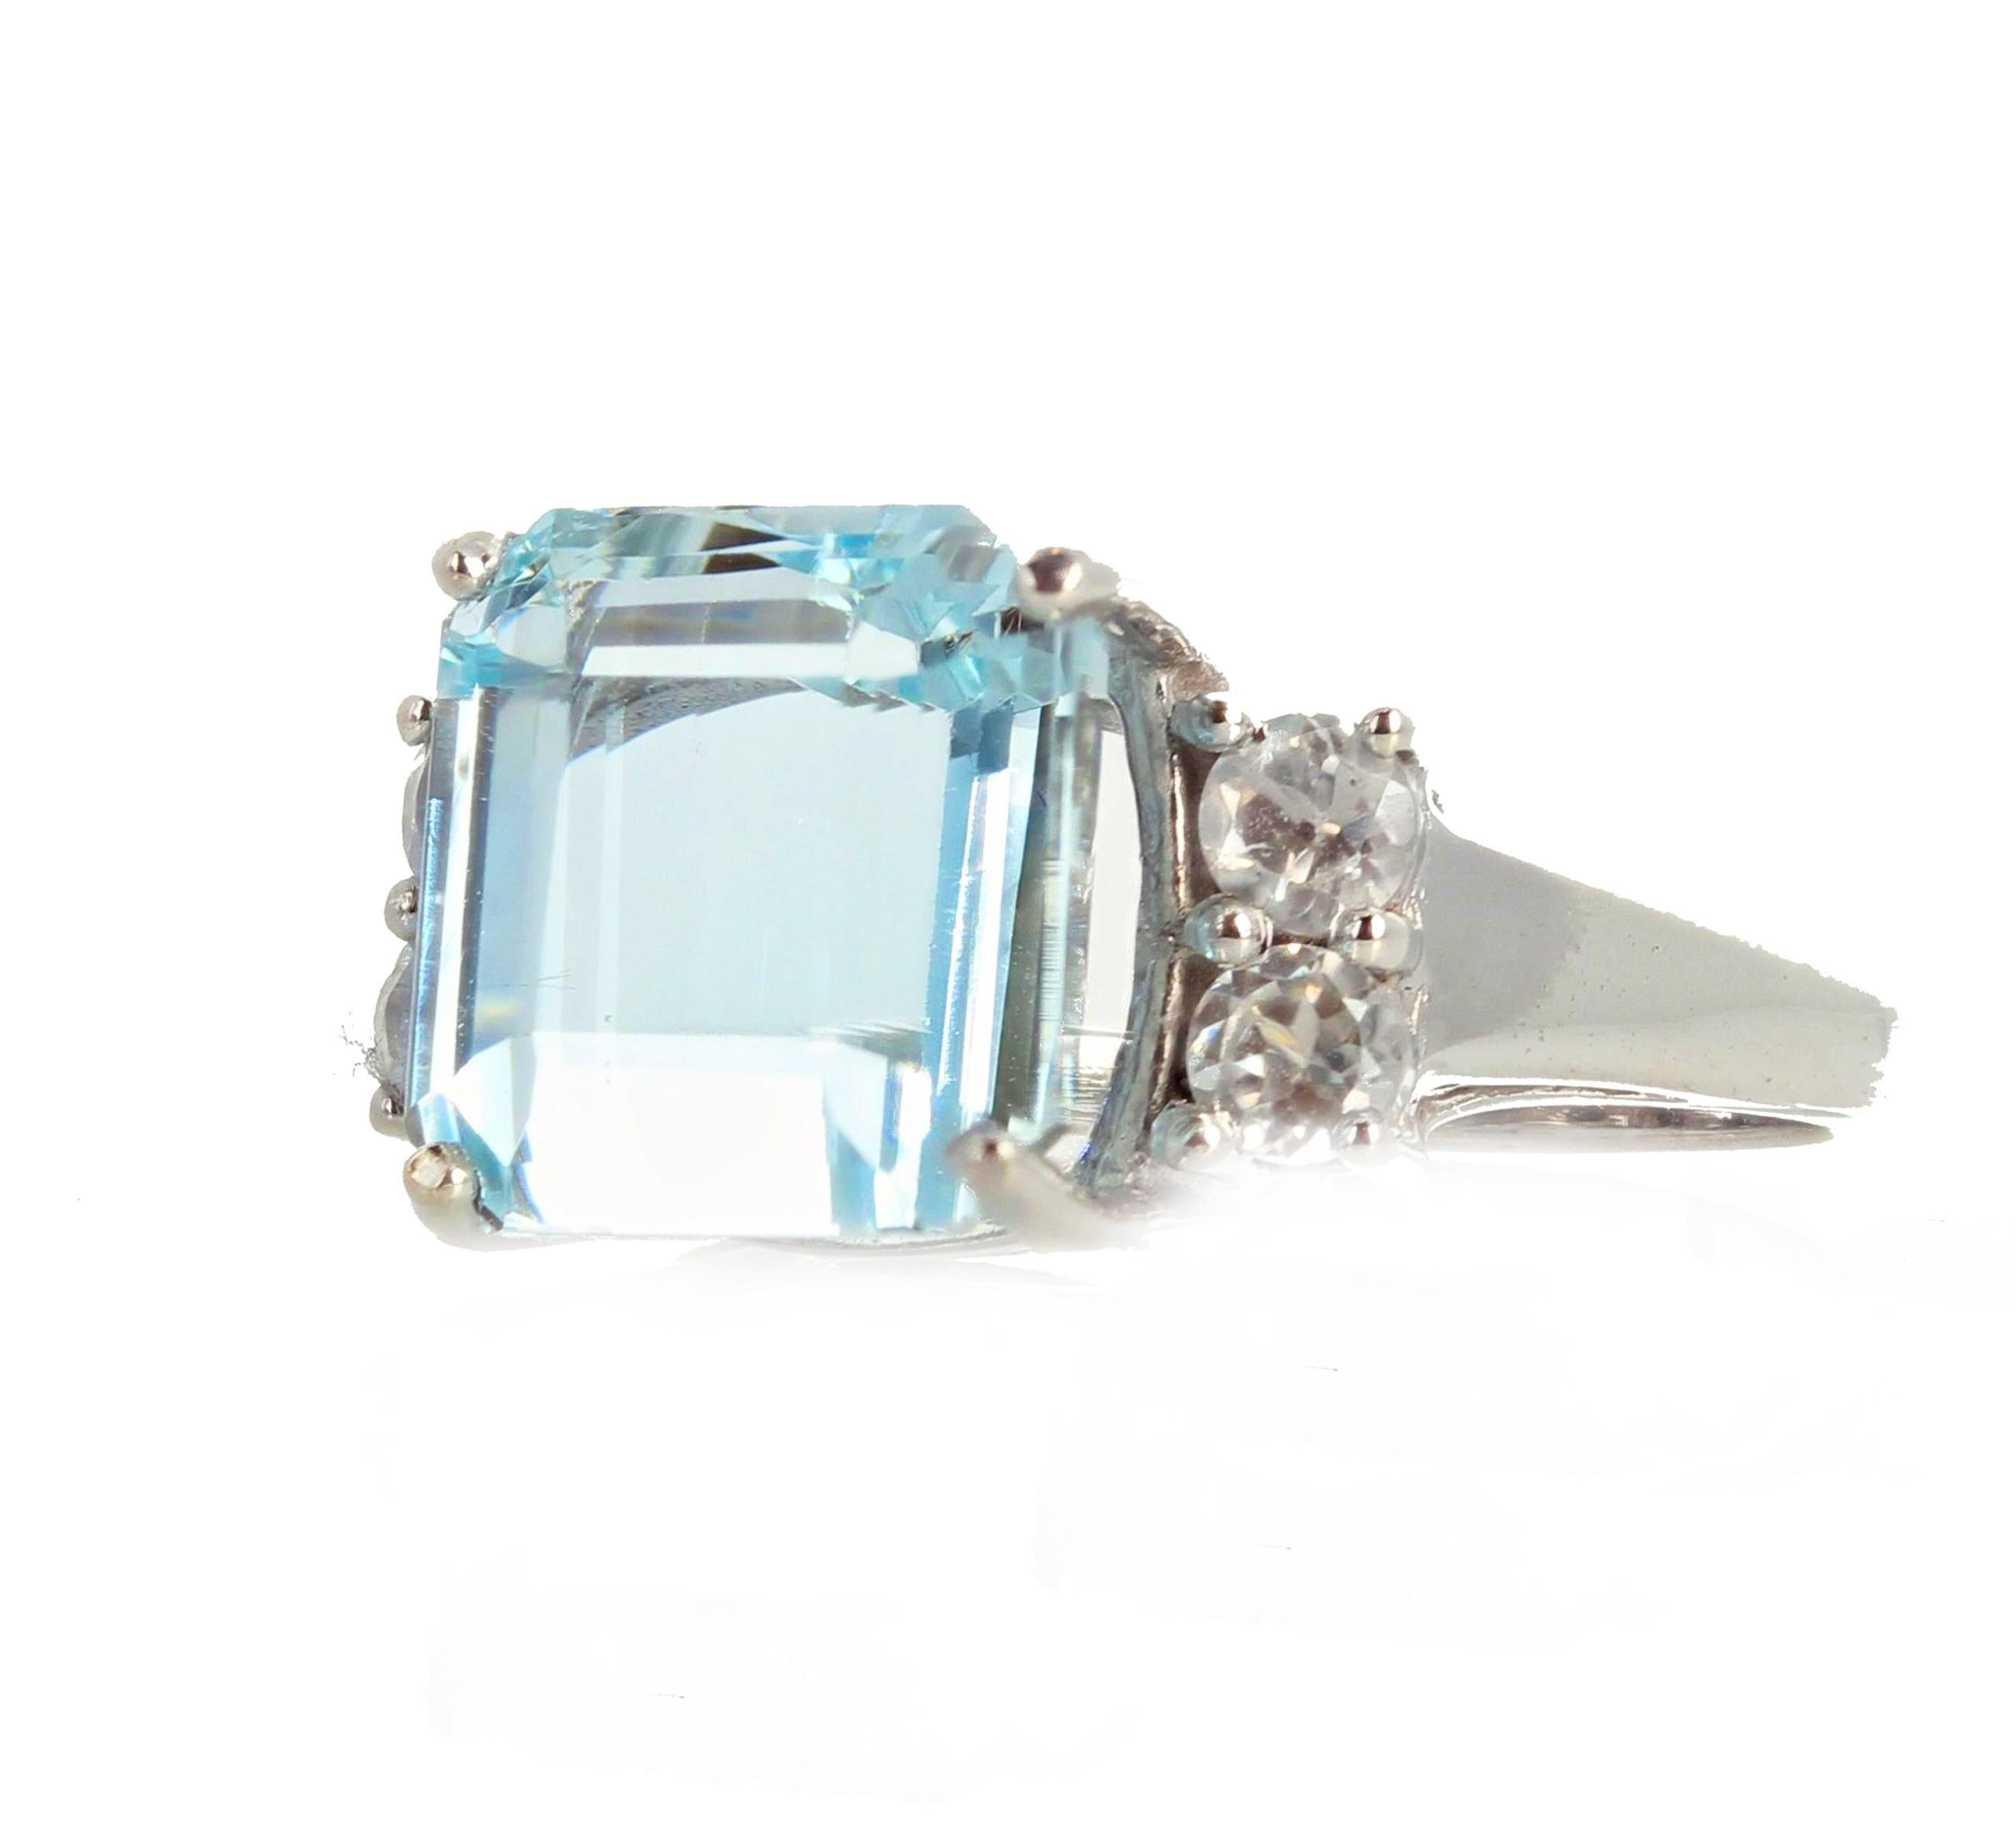 The 0.4 carats of Diamonds enhance the beauty of this magnificent 5.64 carat natural Aquamarine from the famous Santa Maria mine in Brazil.  The Aquamarine and Diamonds are set in a rhodium plated sterling silver size 7 (sizable).  More from this